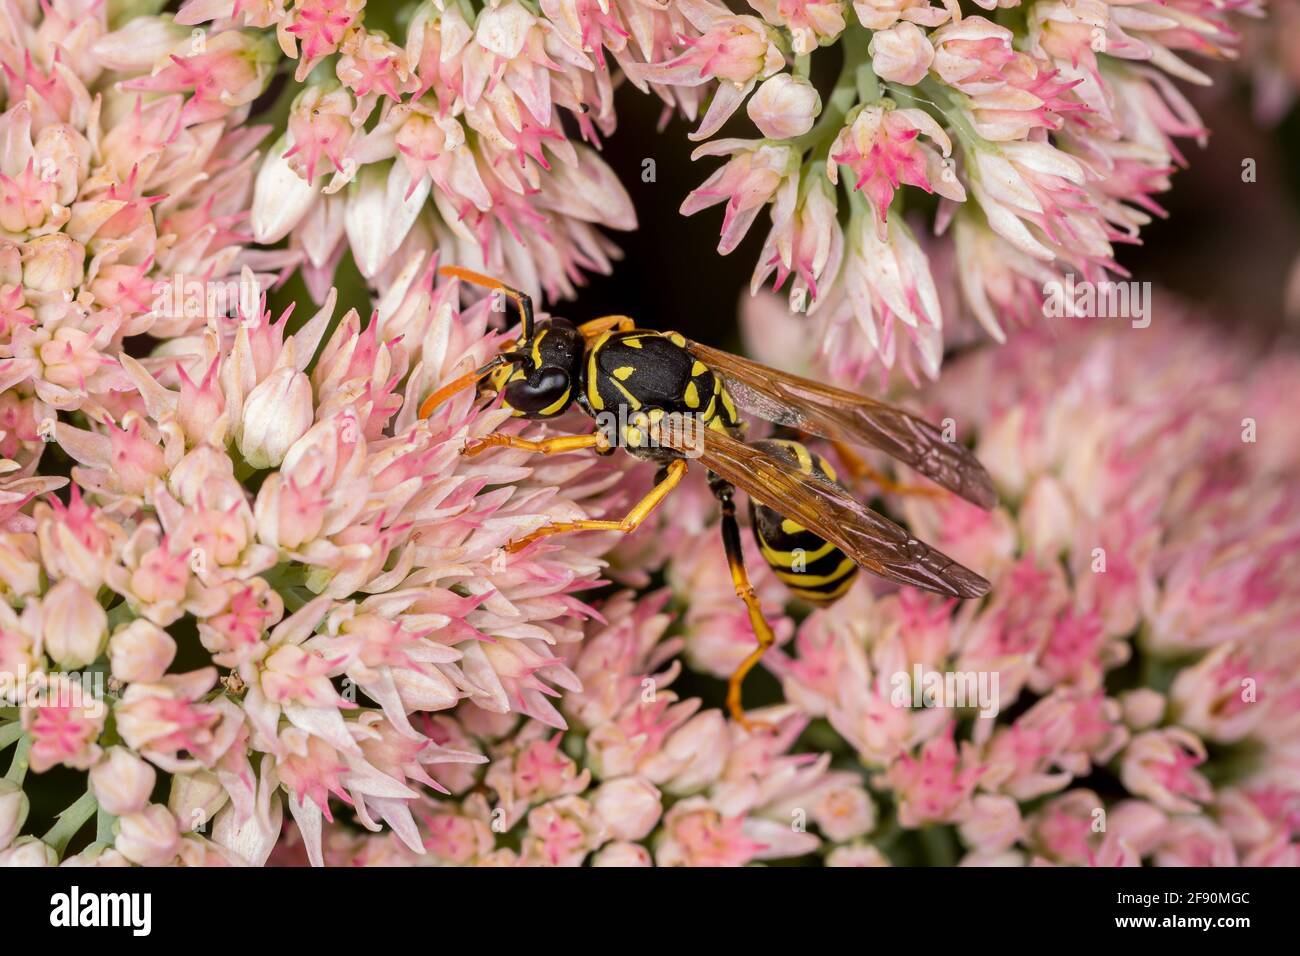 Closeup of European Paper Wasp feeding on nectar from Sedum plant. Concept of insect and wildlife conservation, habitat preservation, and backyard flo Stock Photo